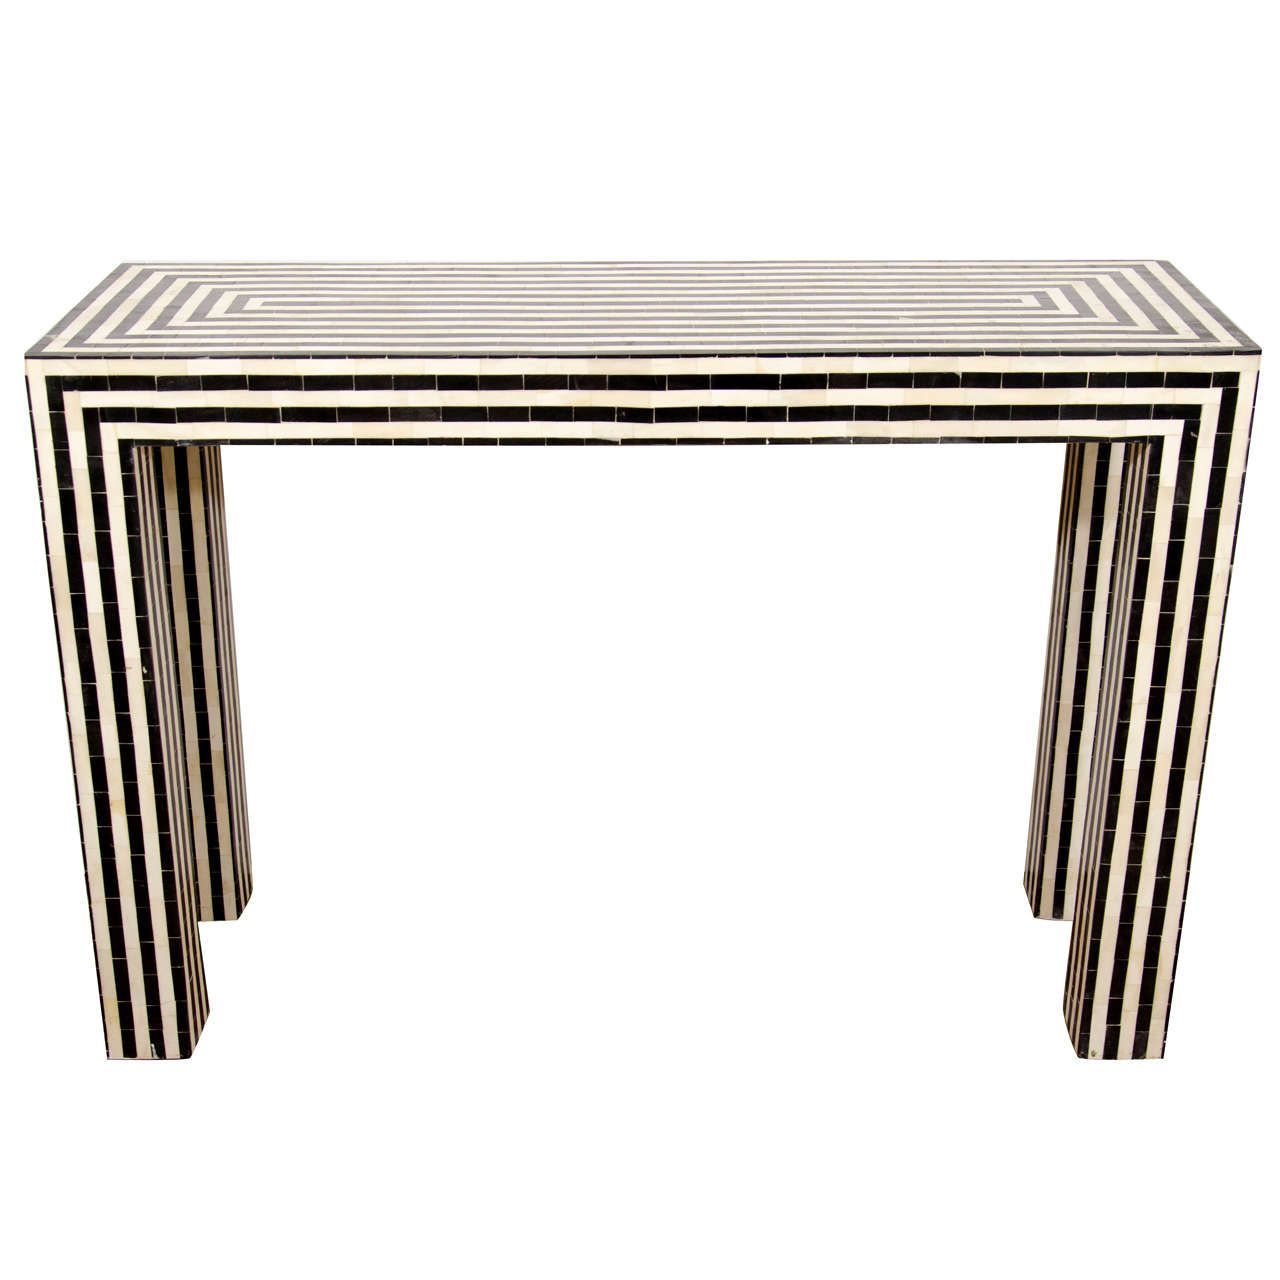 Indian Bone Inlay Black And White Striped Console | Home Decor For Black And White Inlay Console Tables (Photo 1 of 30)